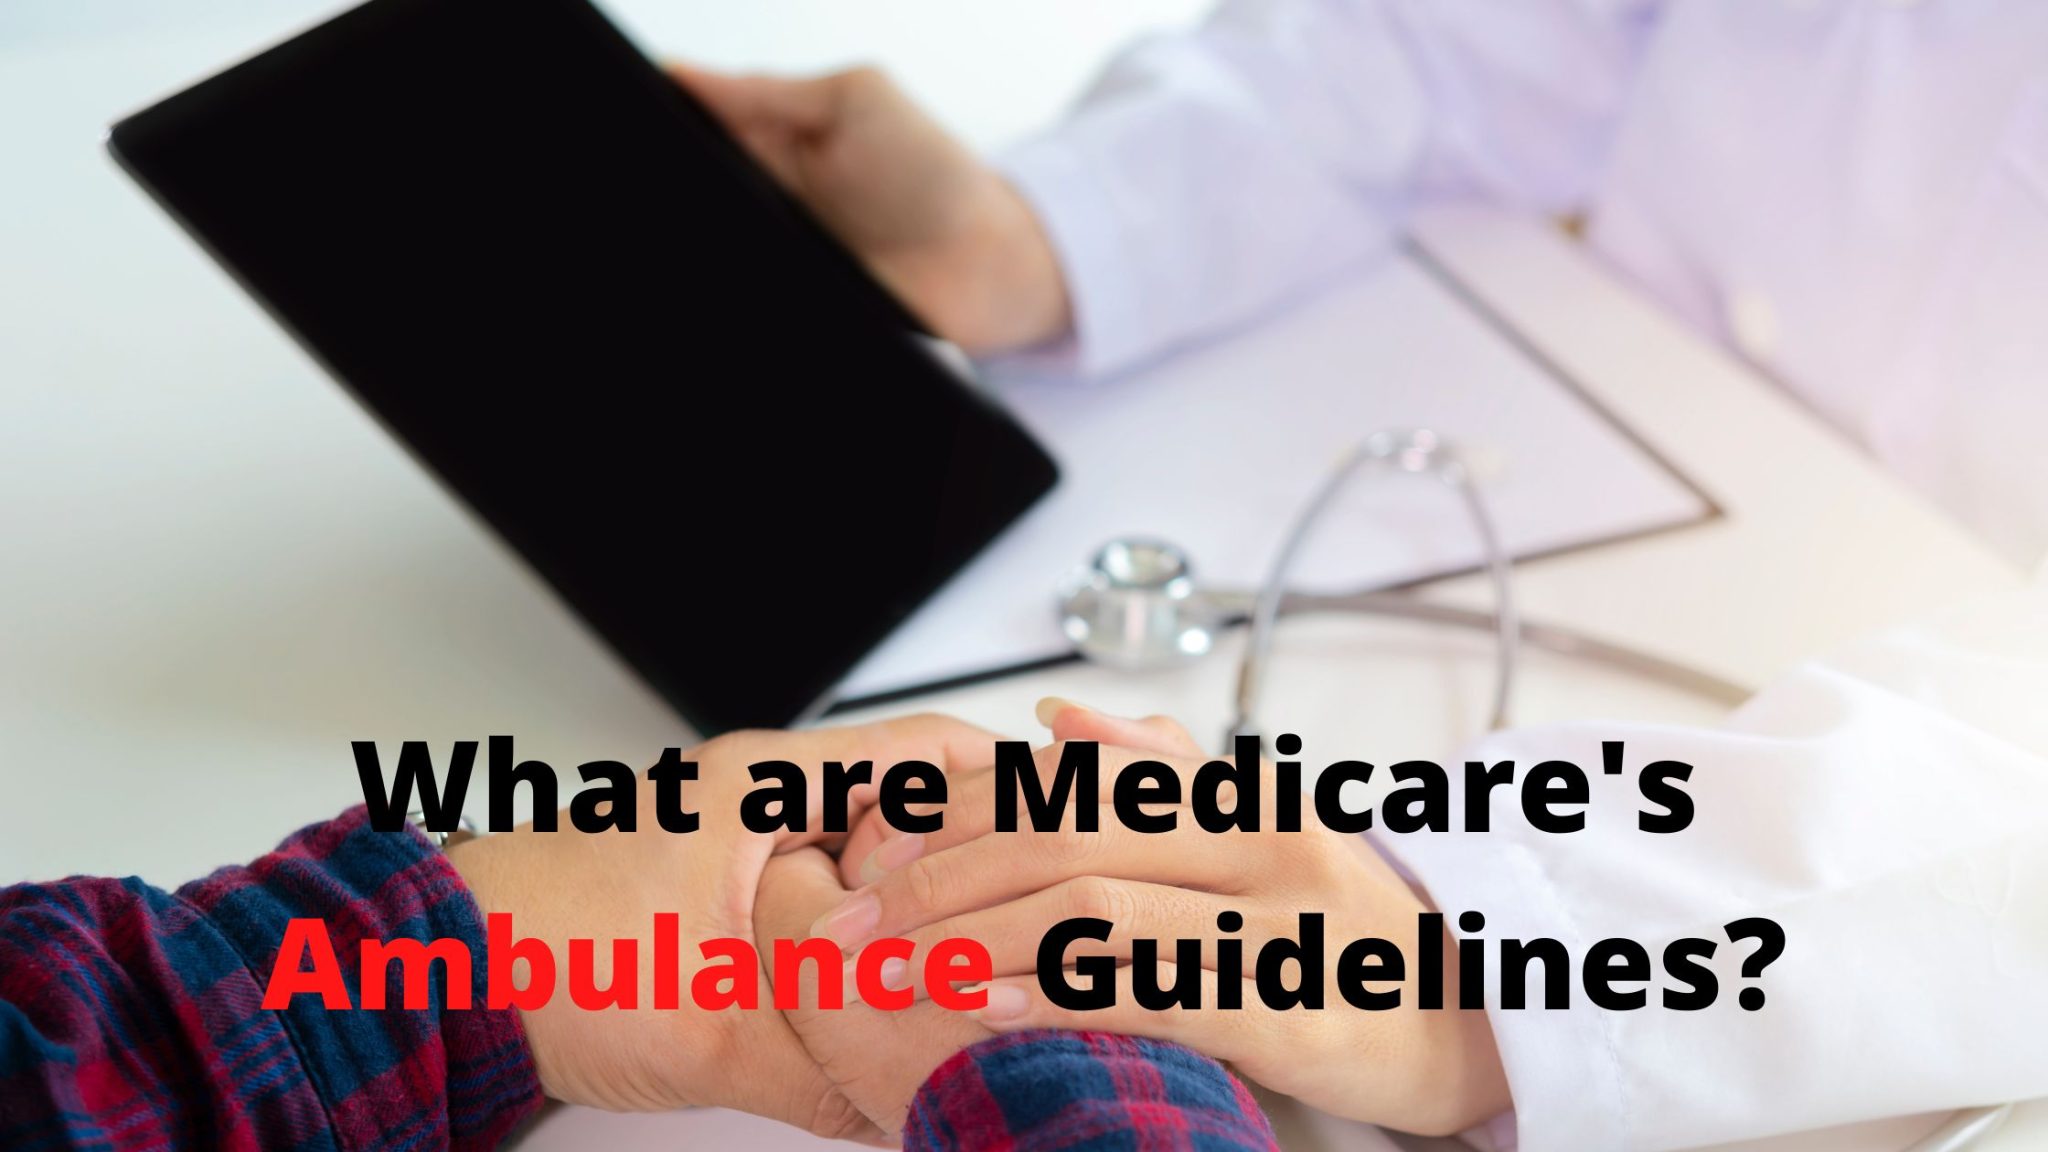 How To Use The Medicare Guidelines for Ambulance Transport to a Doctor